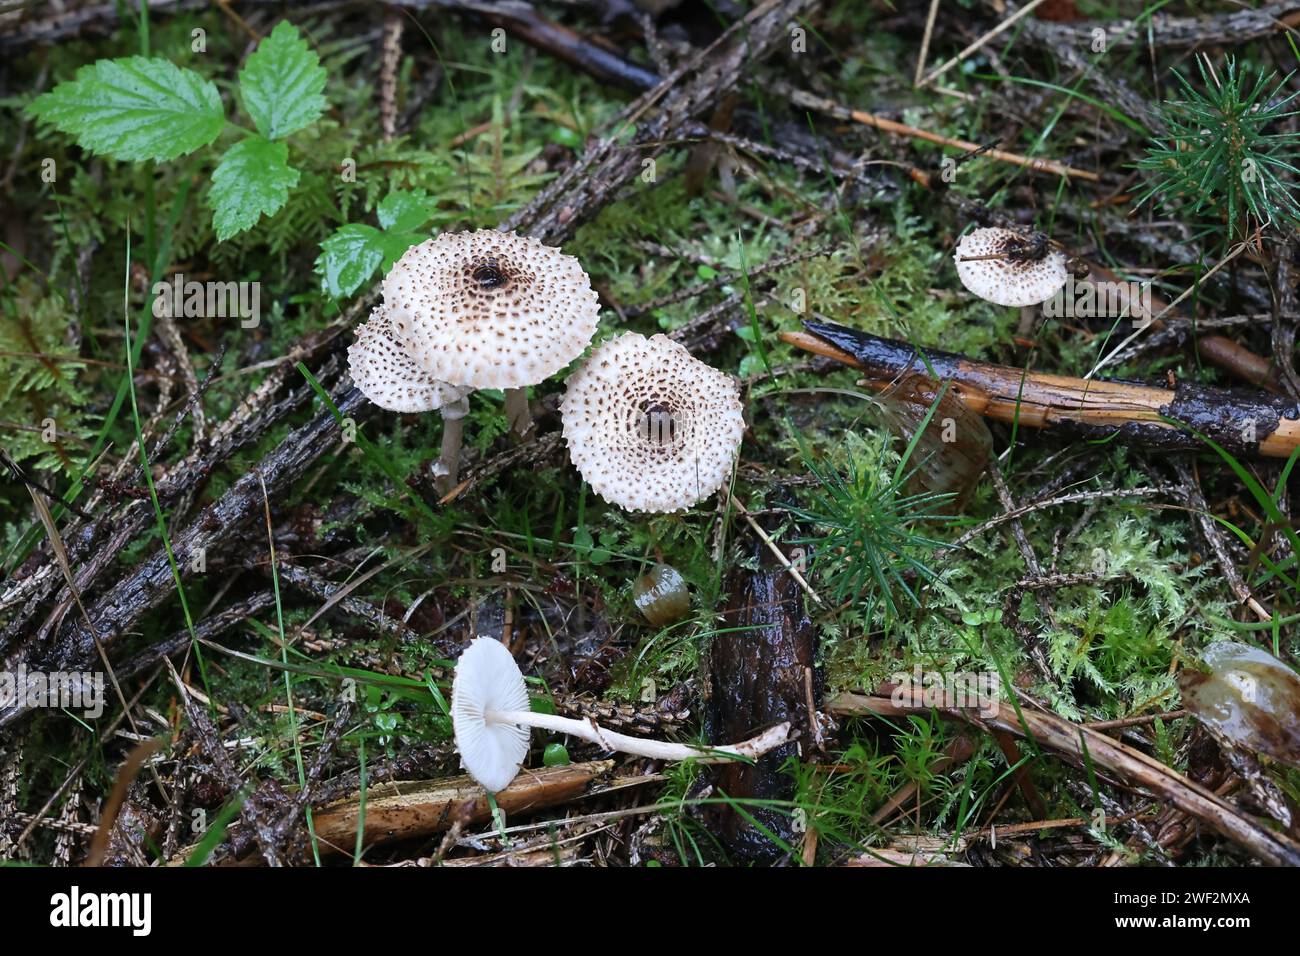 Lepiota felina, commonly known as Cat Dapperling, wild fungus from Finland Stock Photo